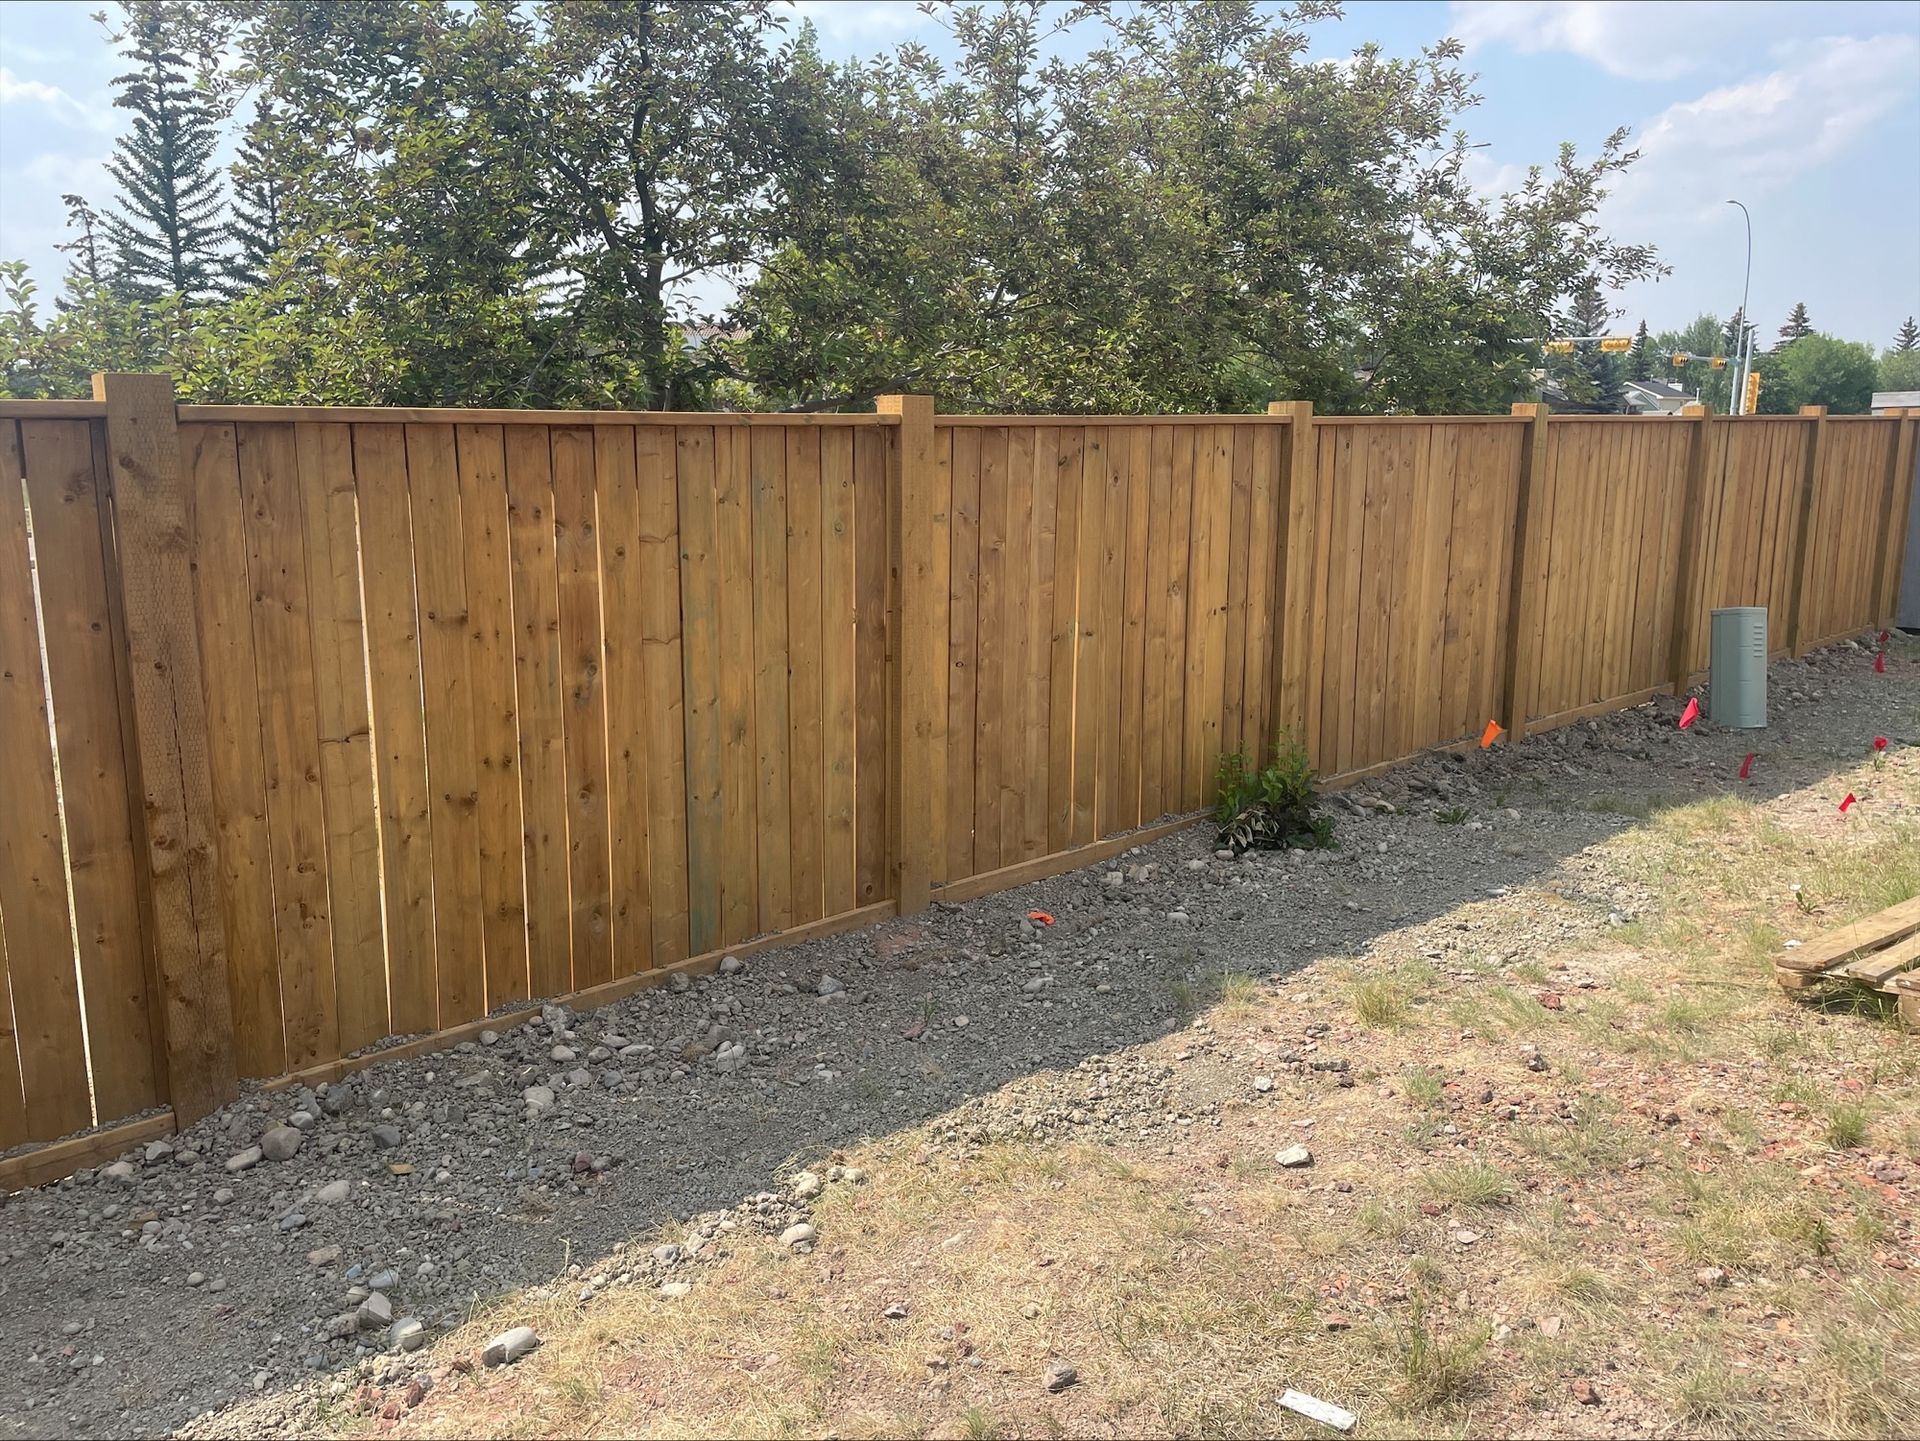 New pressure treated wood fence installation by our Toronto Fence Pros